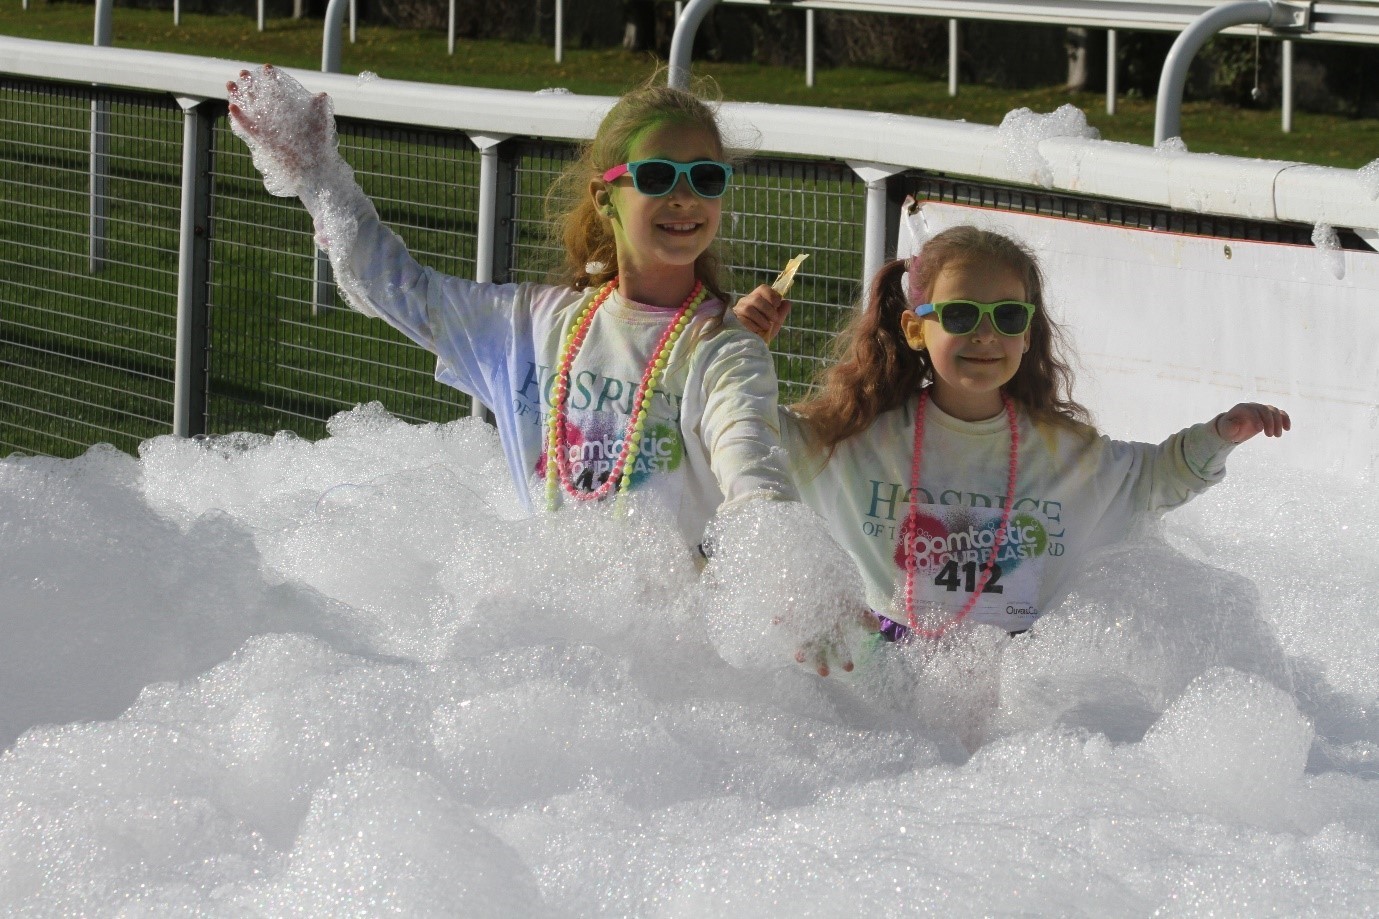 The Foamtastic Colour Blast in aid of the Hospice of the Good Shepherd returns to Chester Racecourse later this year.